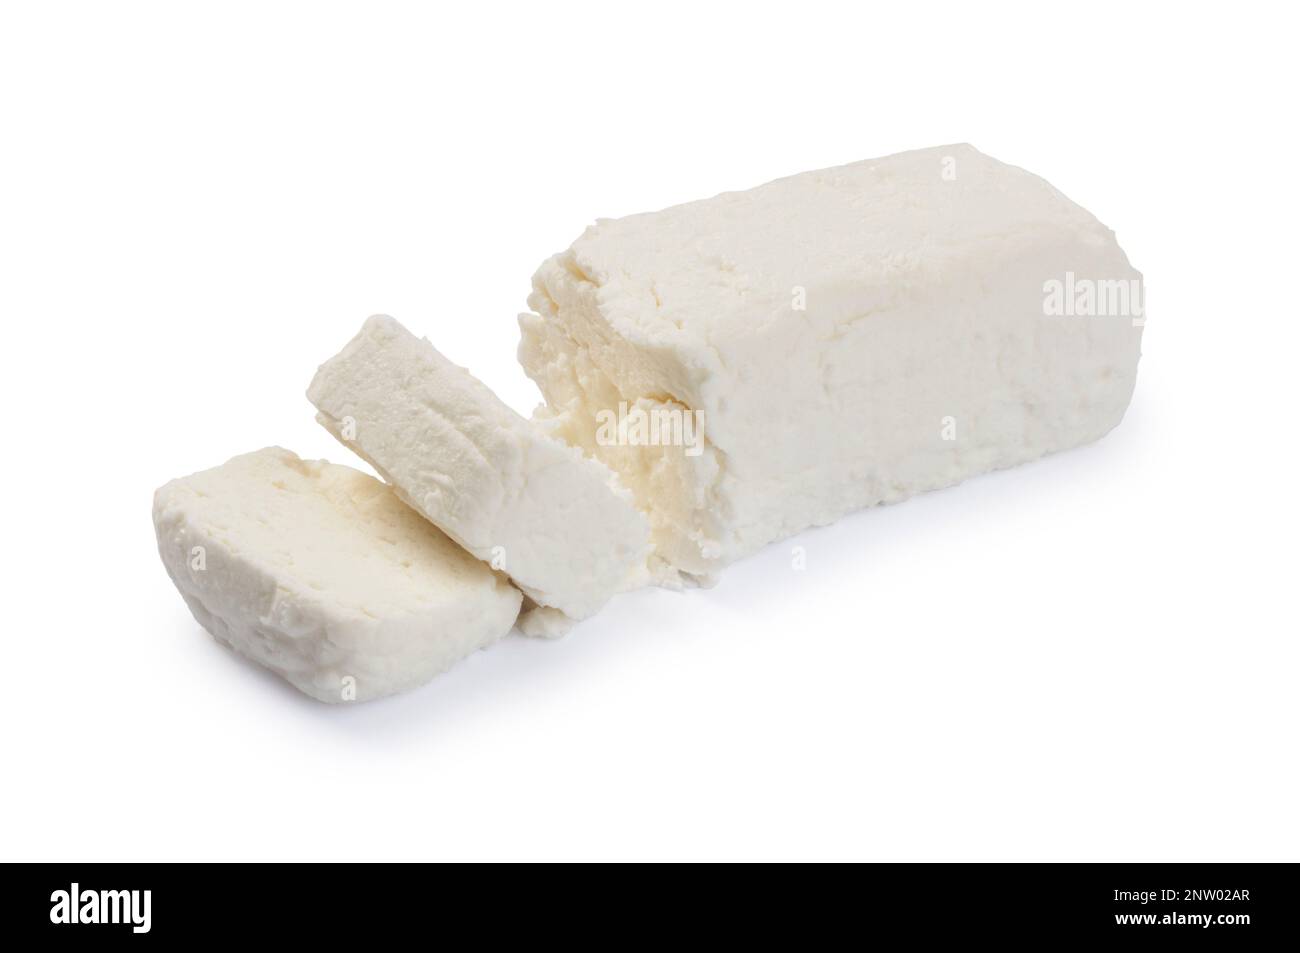 Studio shot of goats cheese cut out against a white background - John Gollop Stock Photo